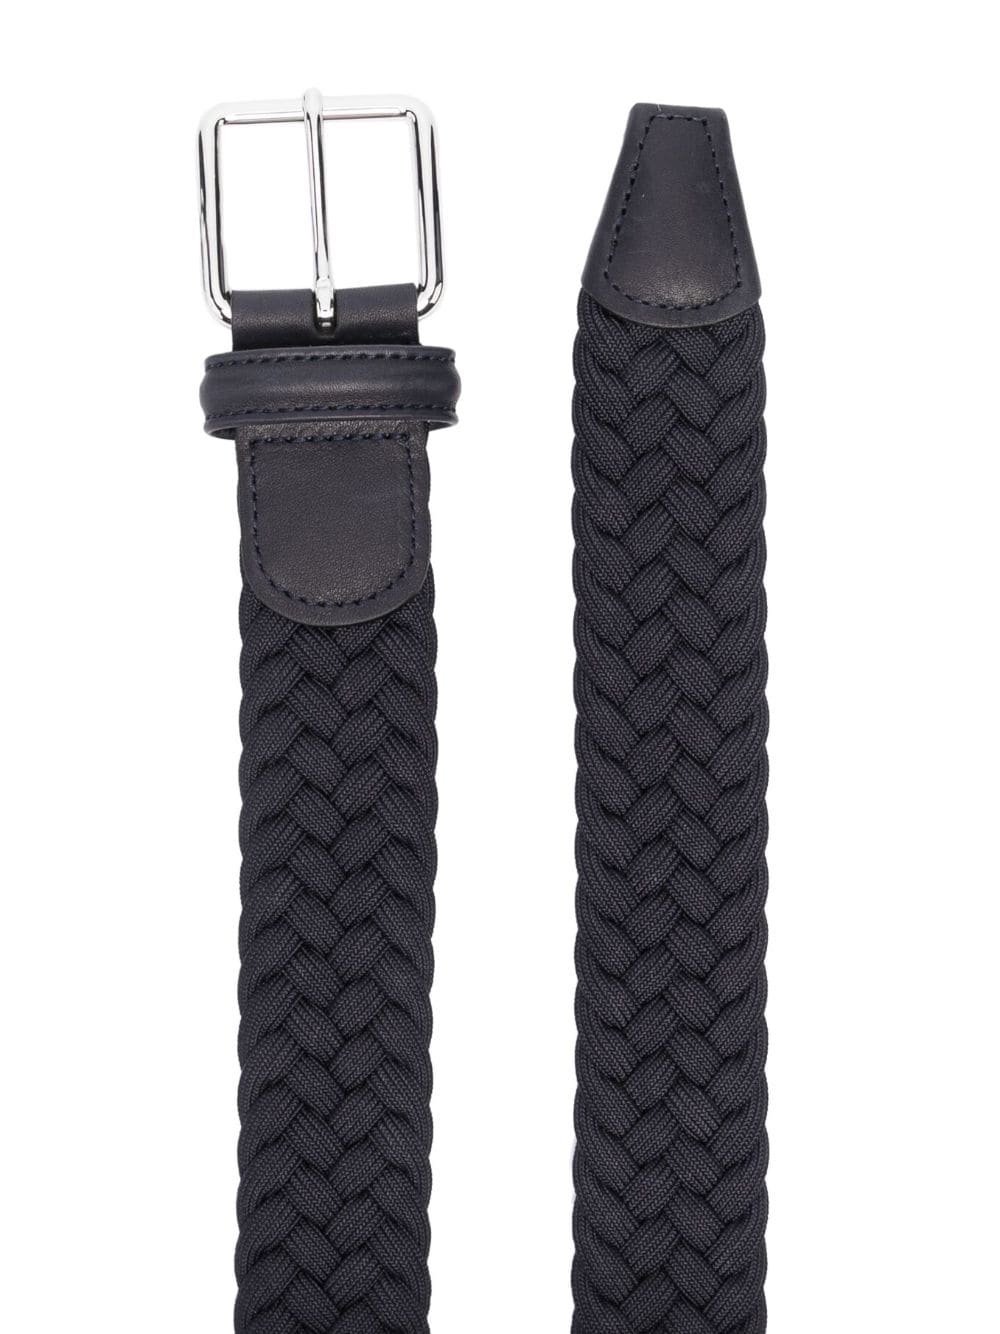 Image 2 of Anderson's braided-design belt